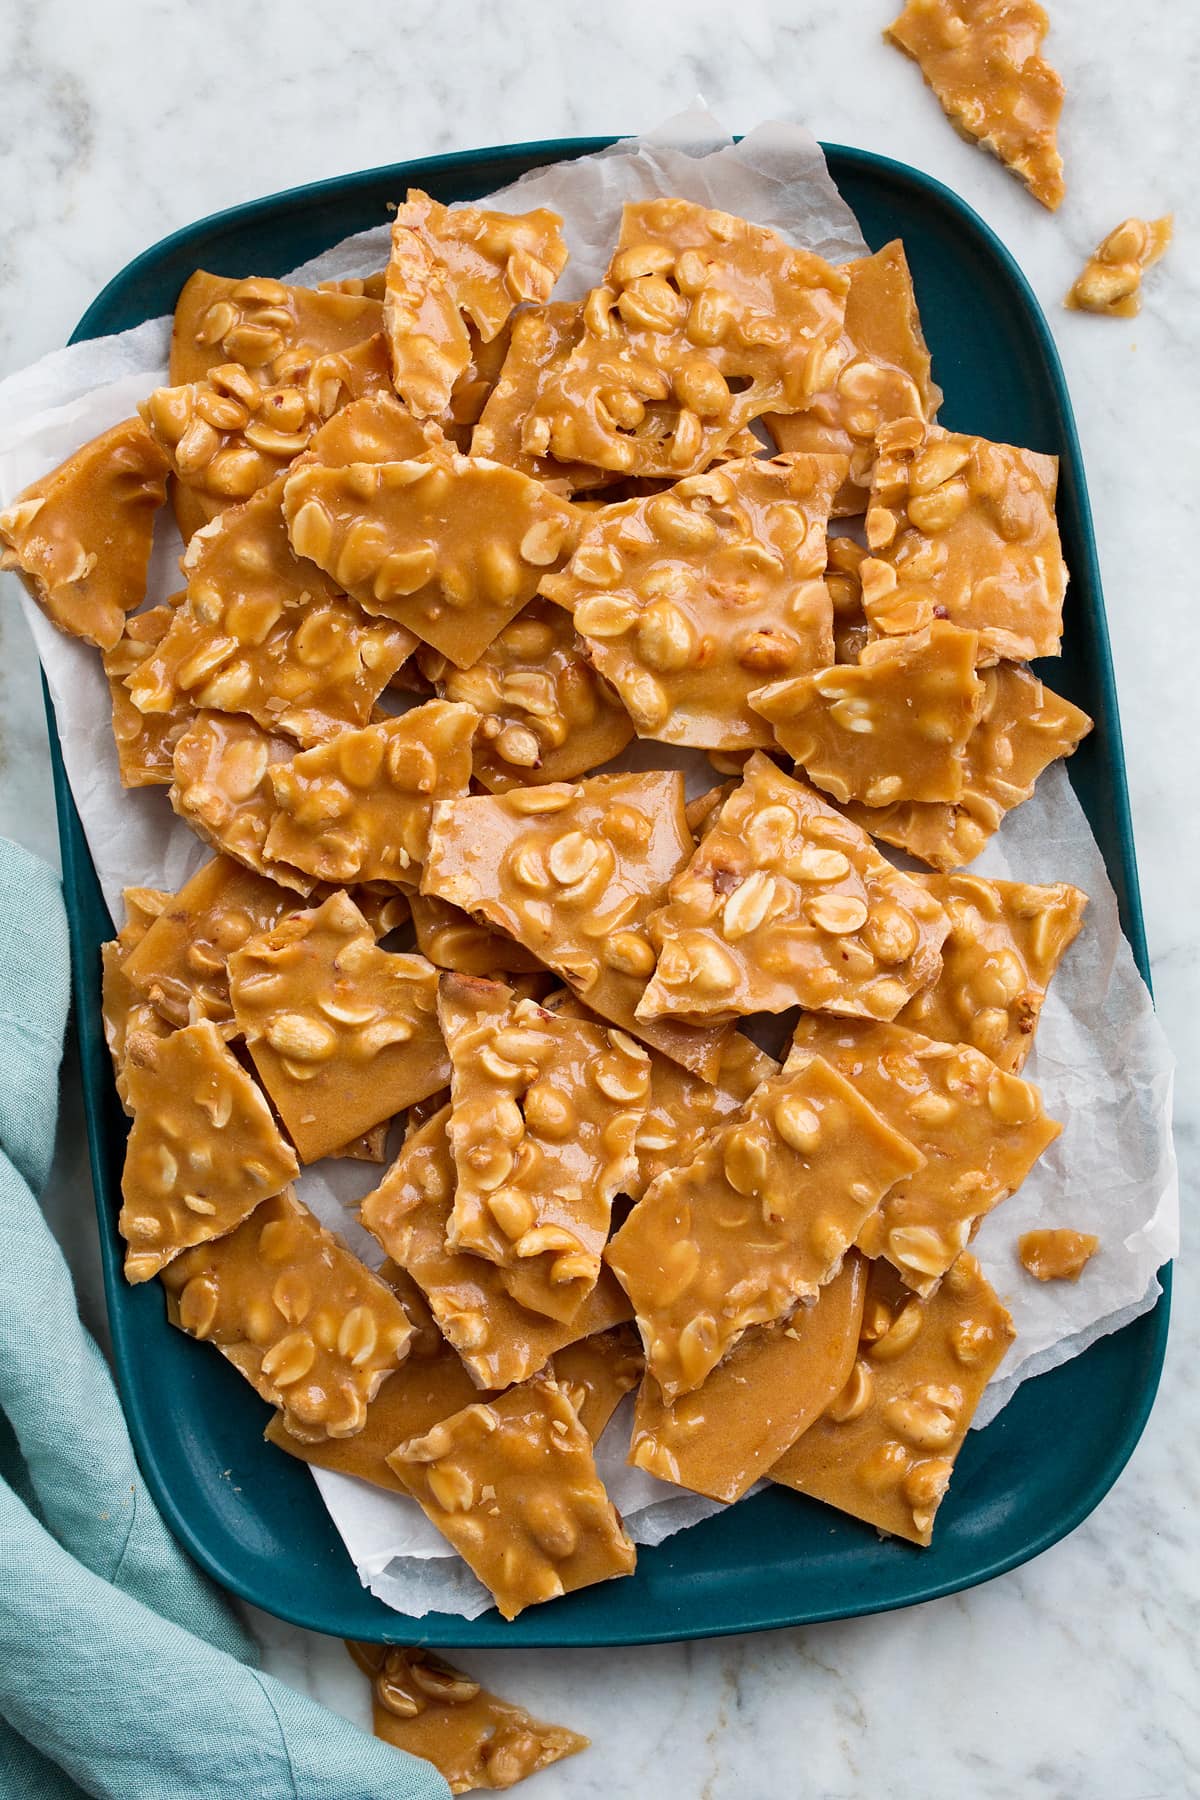 Peanut Brittle {with Helpful Tips} - Cooking Classy